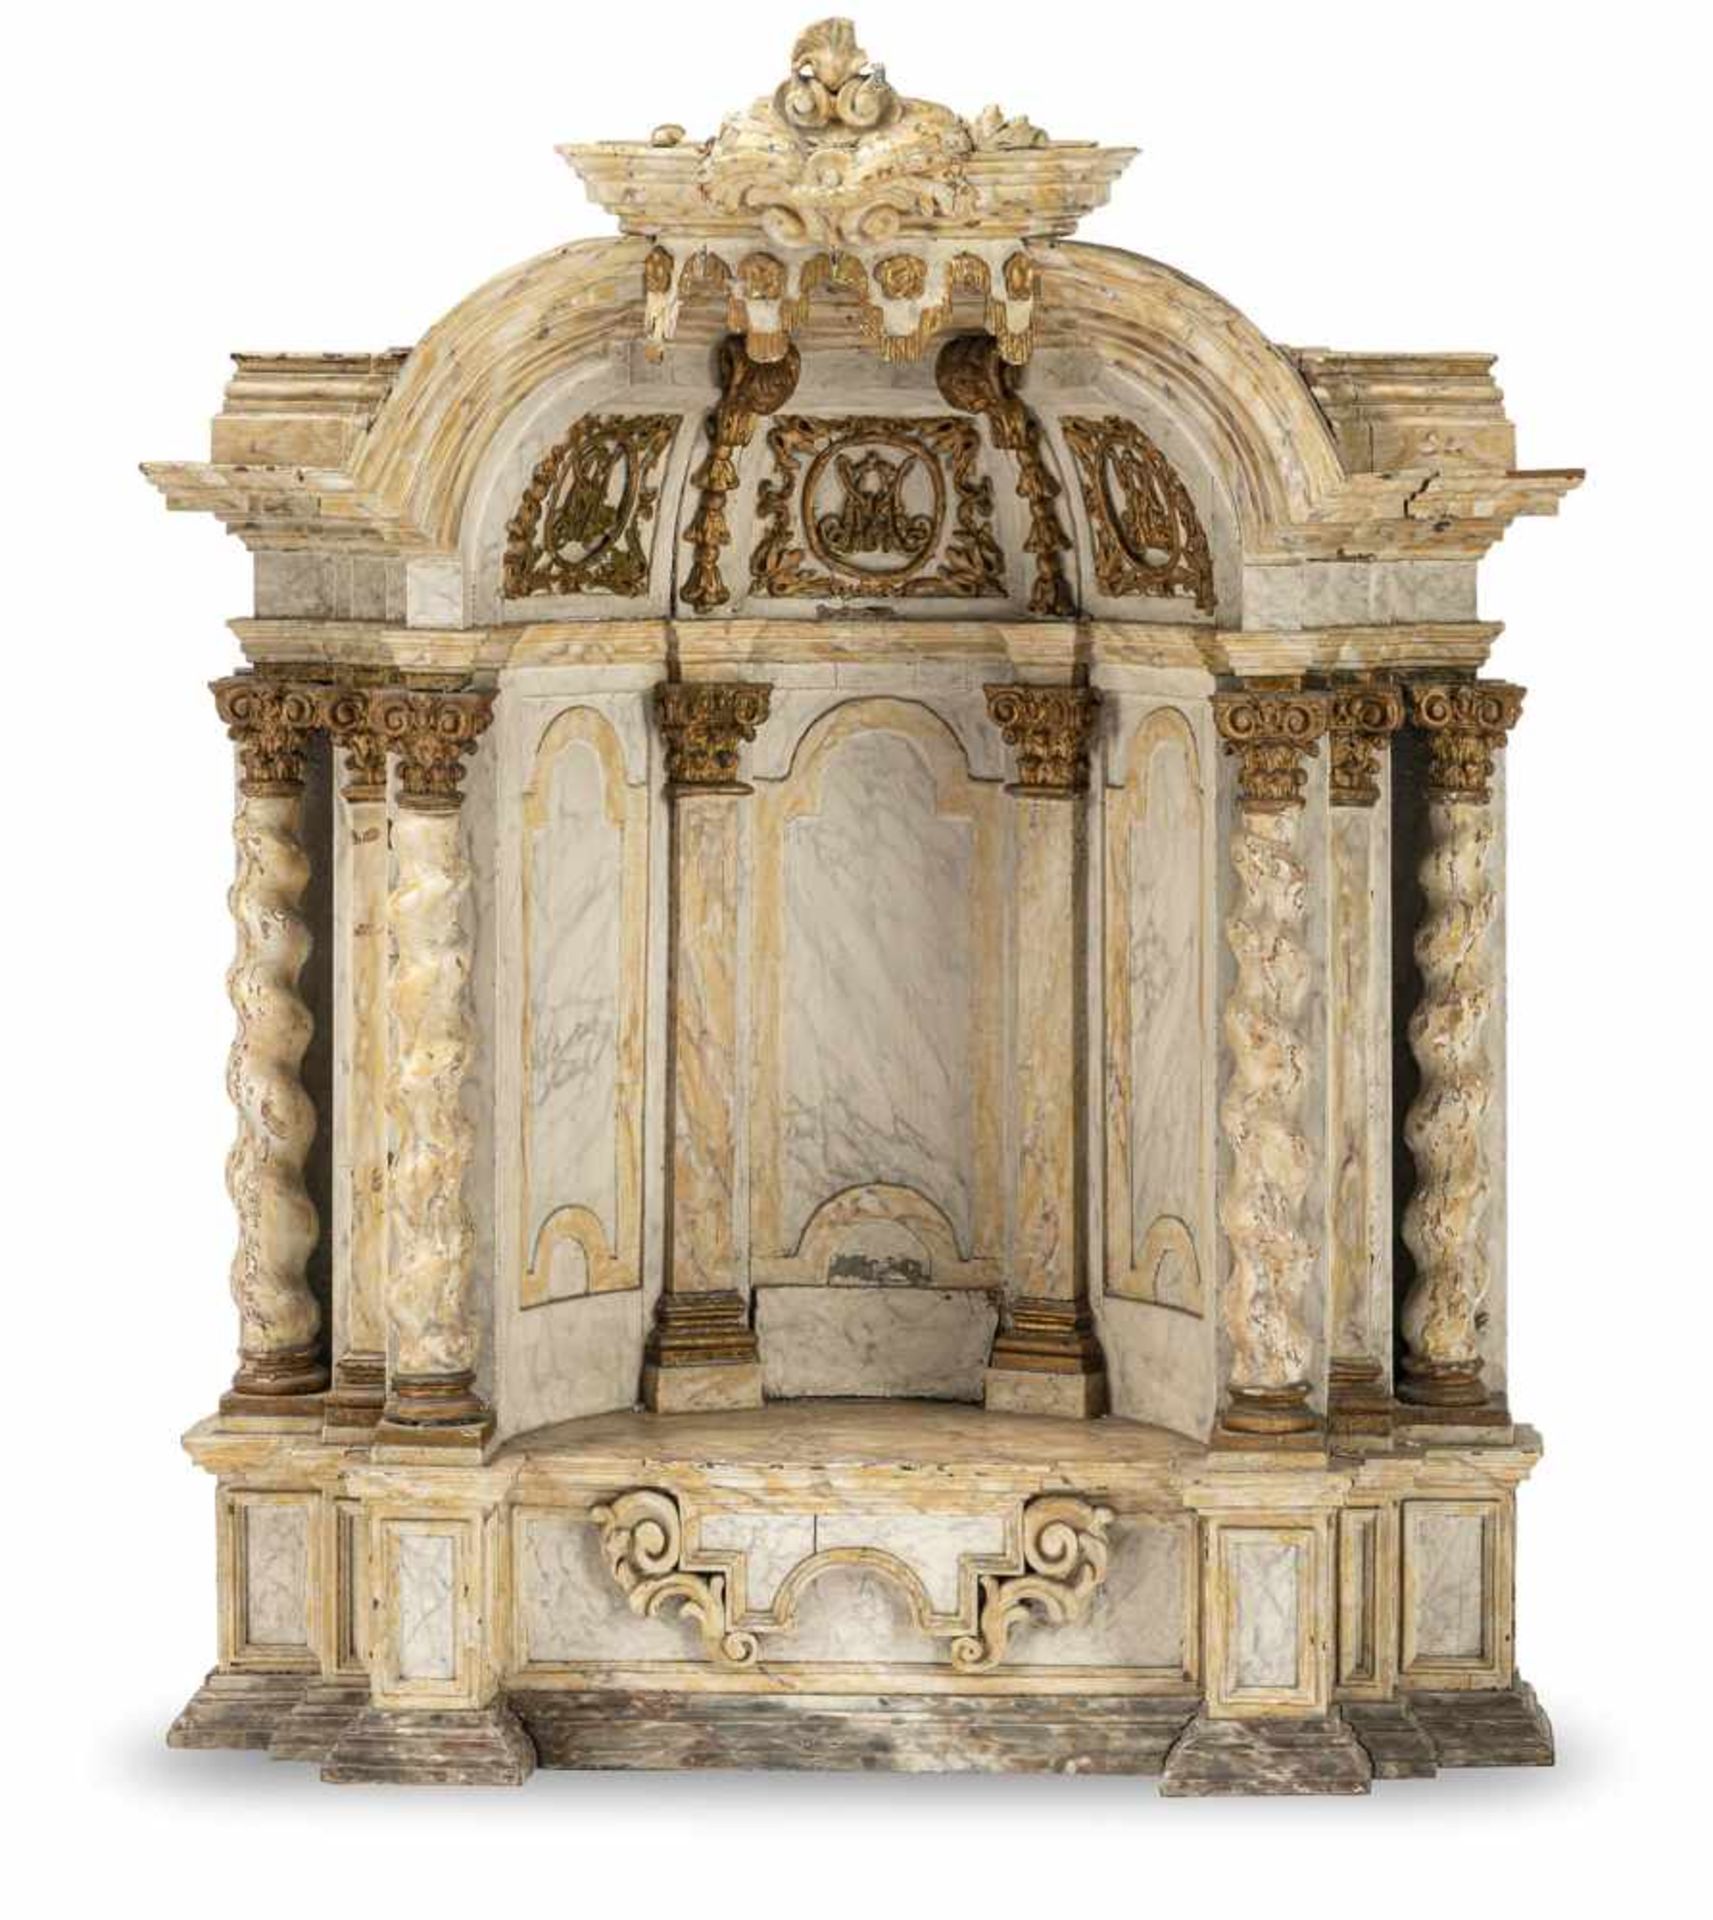 A splendid Baroque carved, painted and parcel gilt altar alcove, South Germany, 18th ct. Rest. Minor